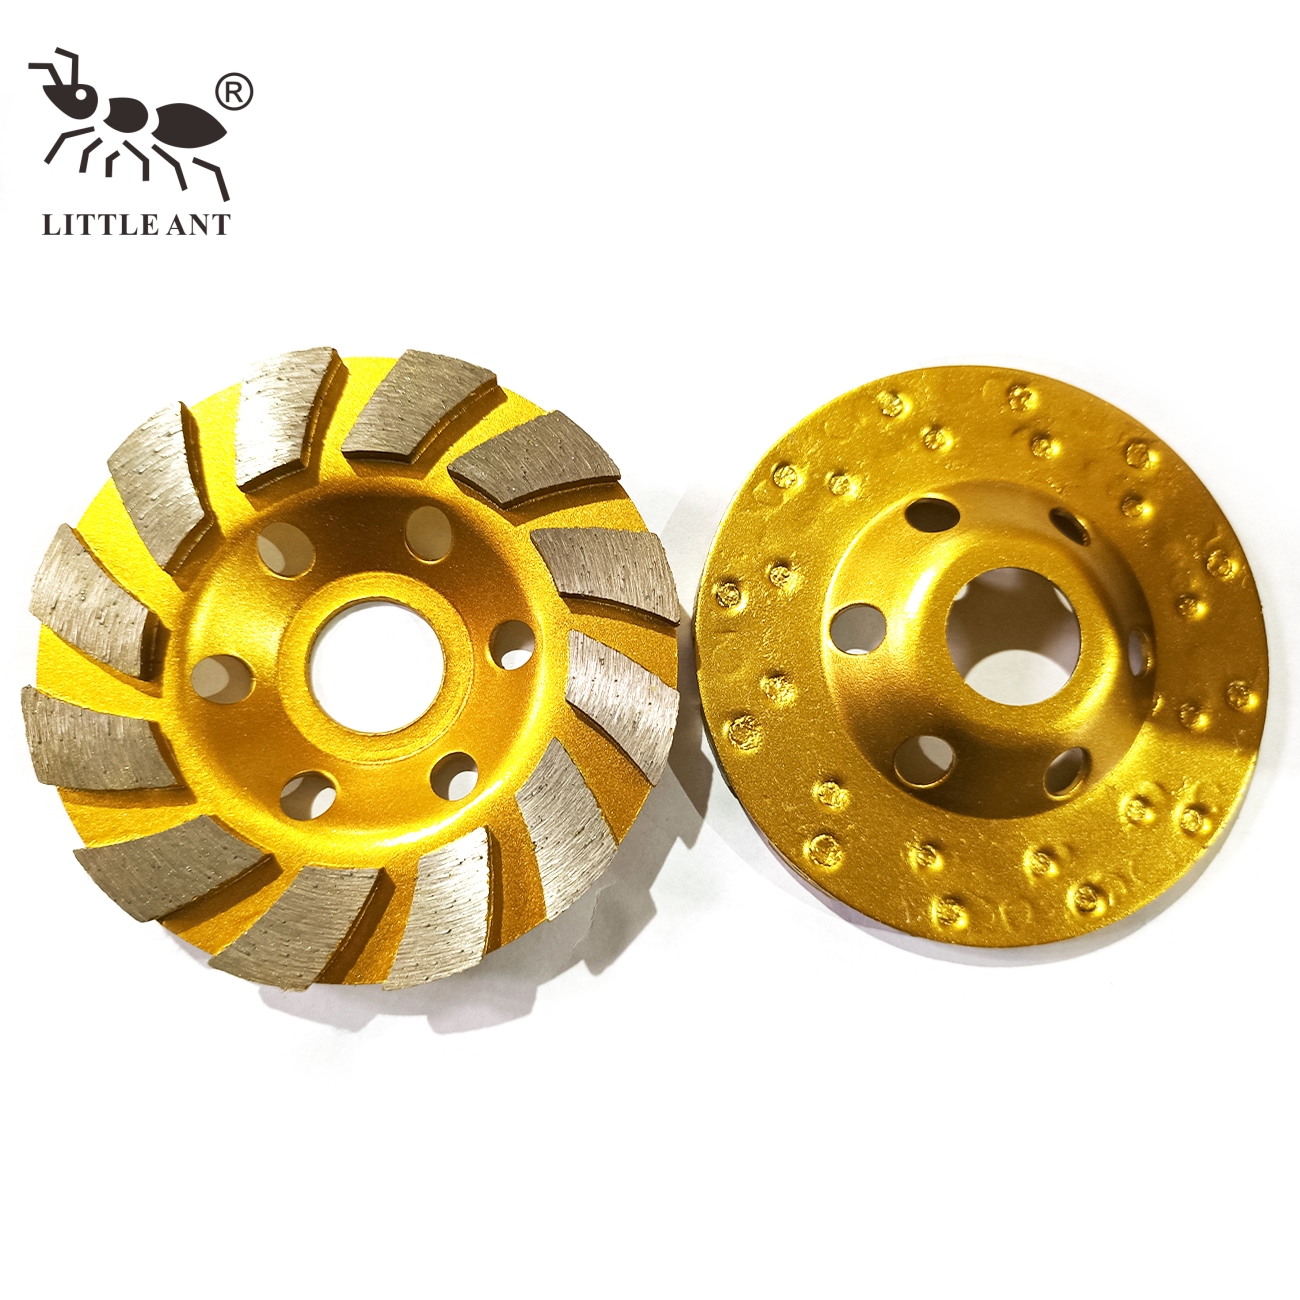 LITTLE ANT 4 Inch Turbo Teeth 12-Segmented Cup Wheel for Concrete And Stone 